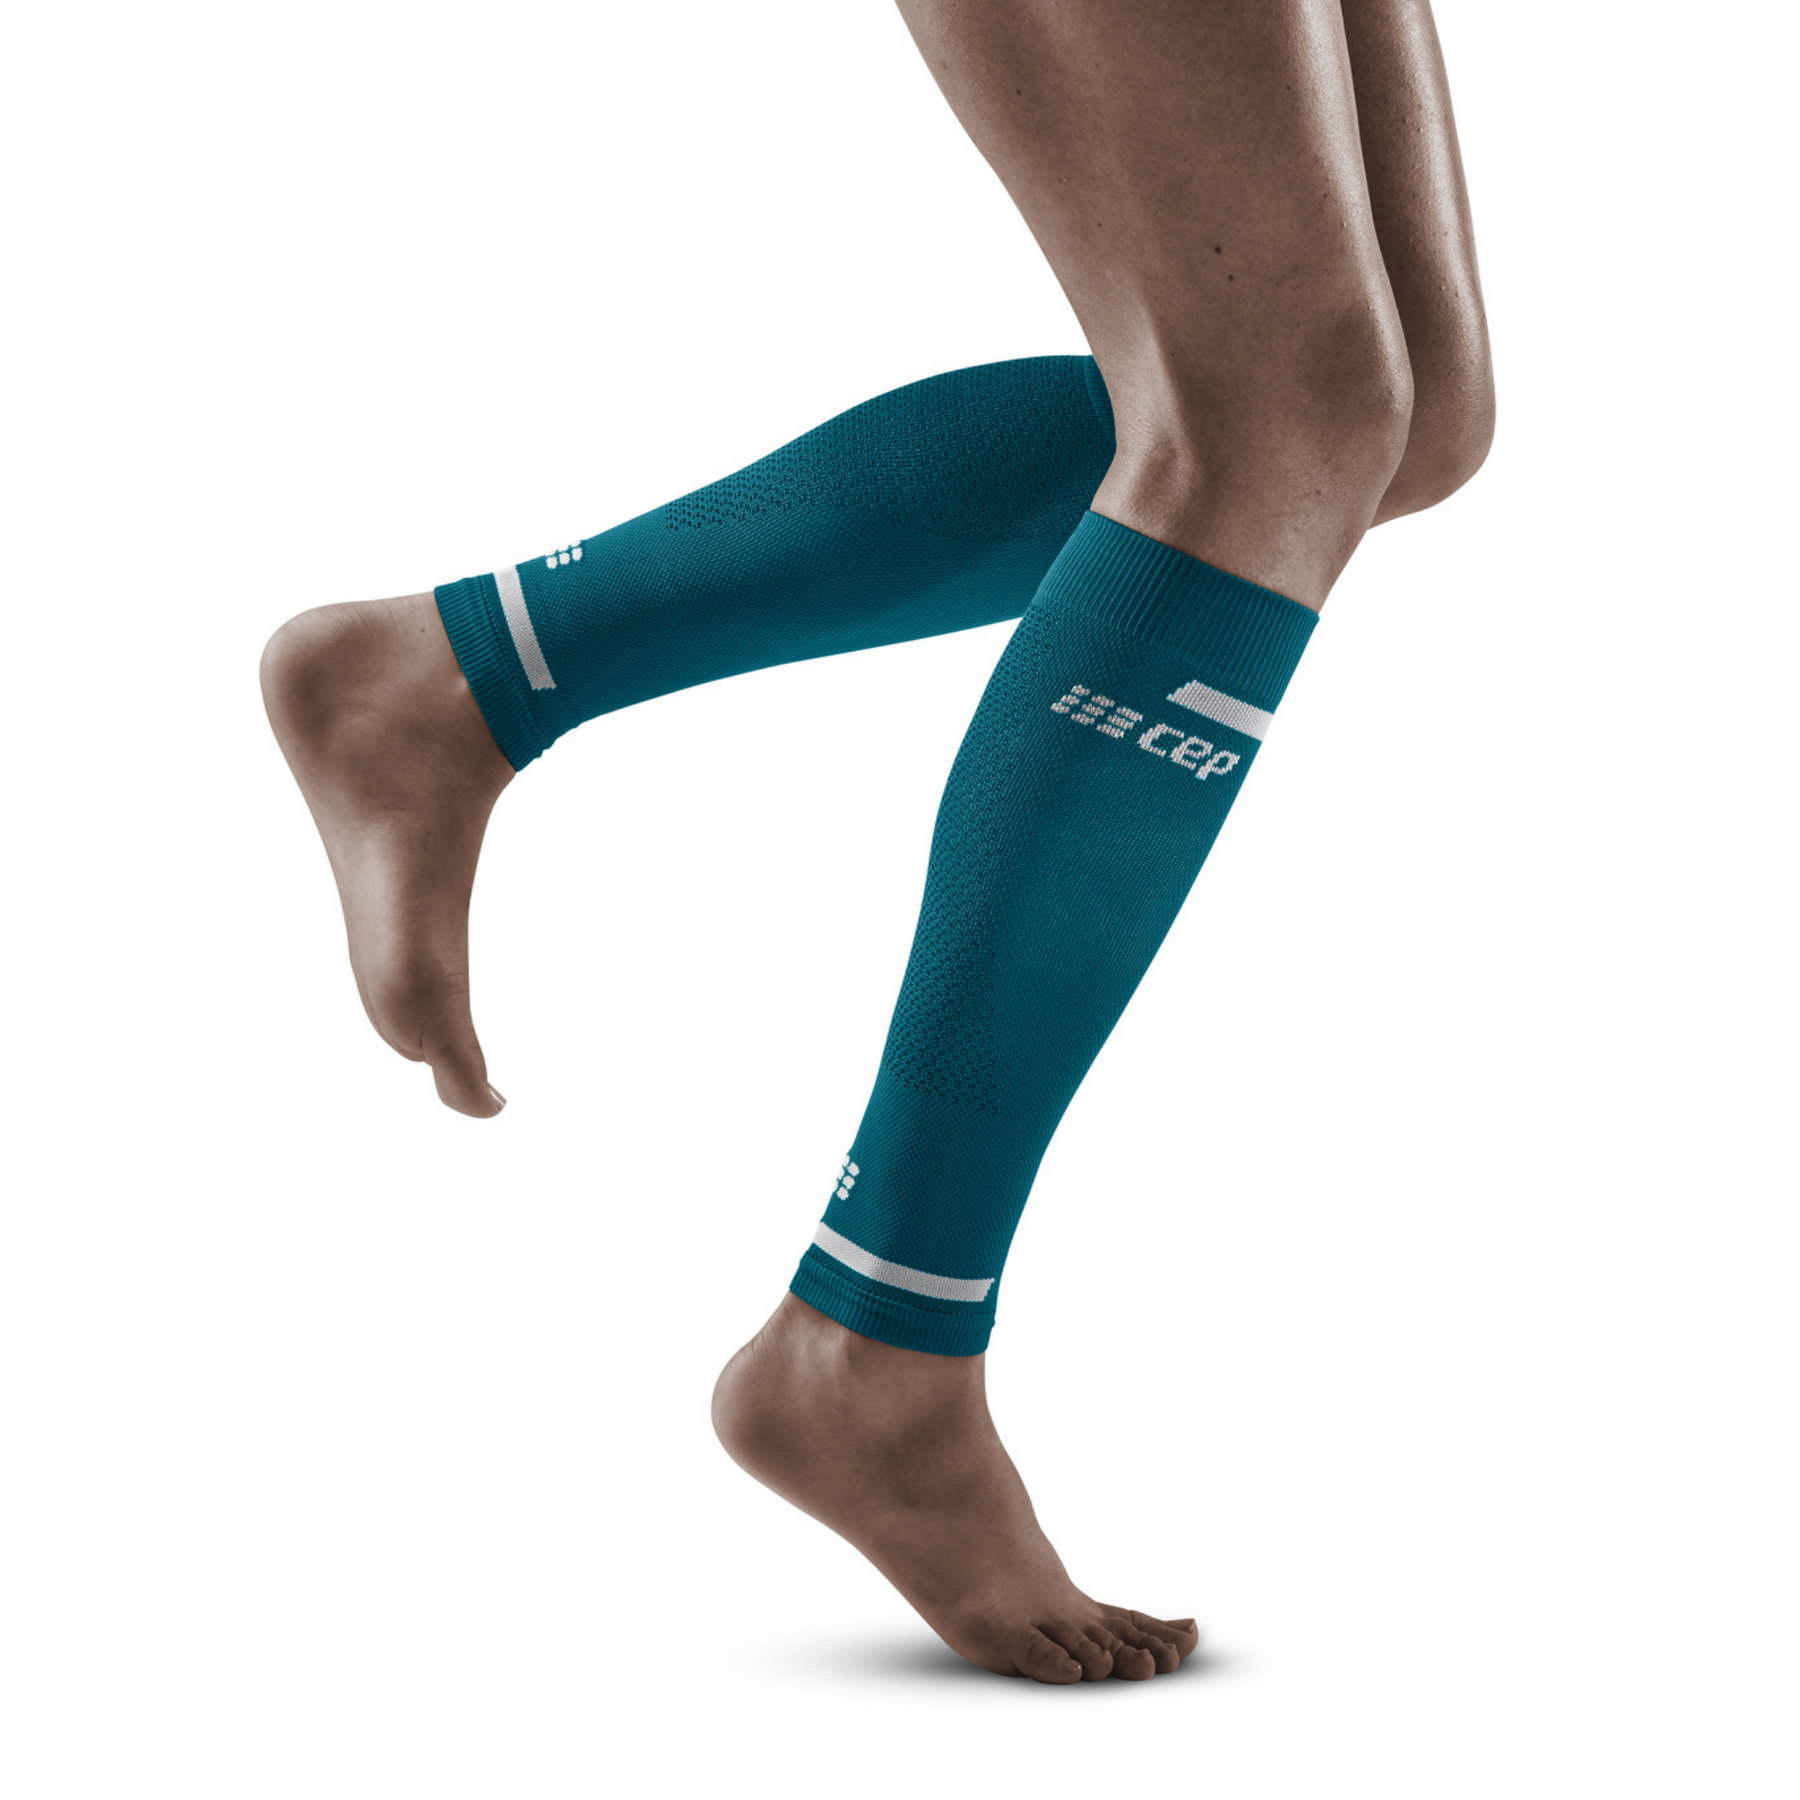 Review of CEP Compression Socks and Calf Sleeves